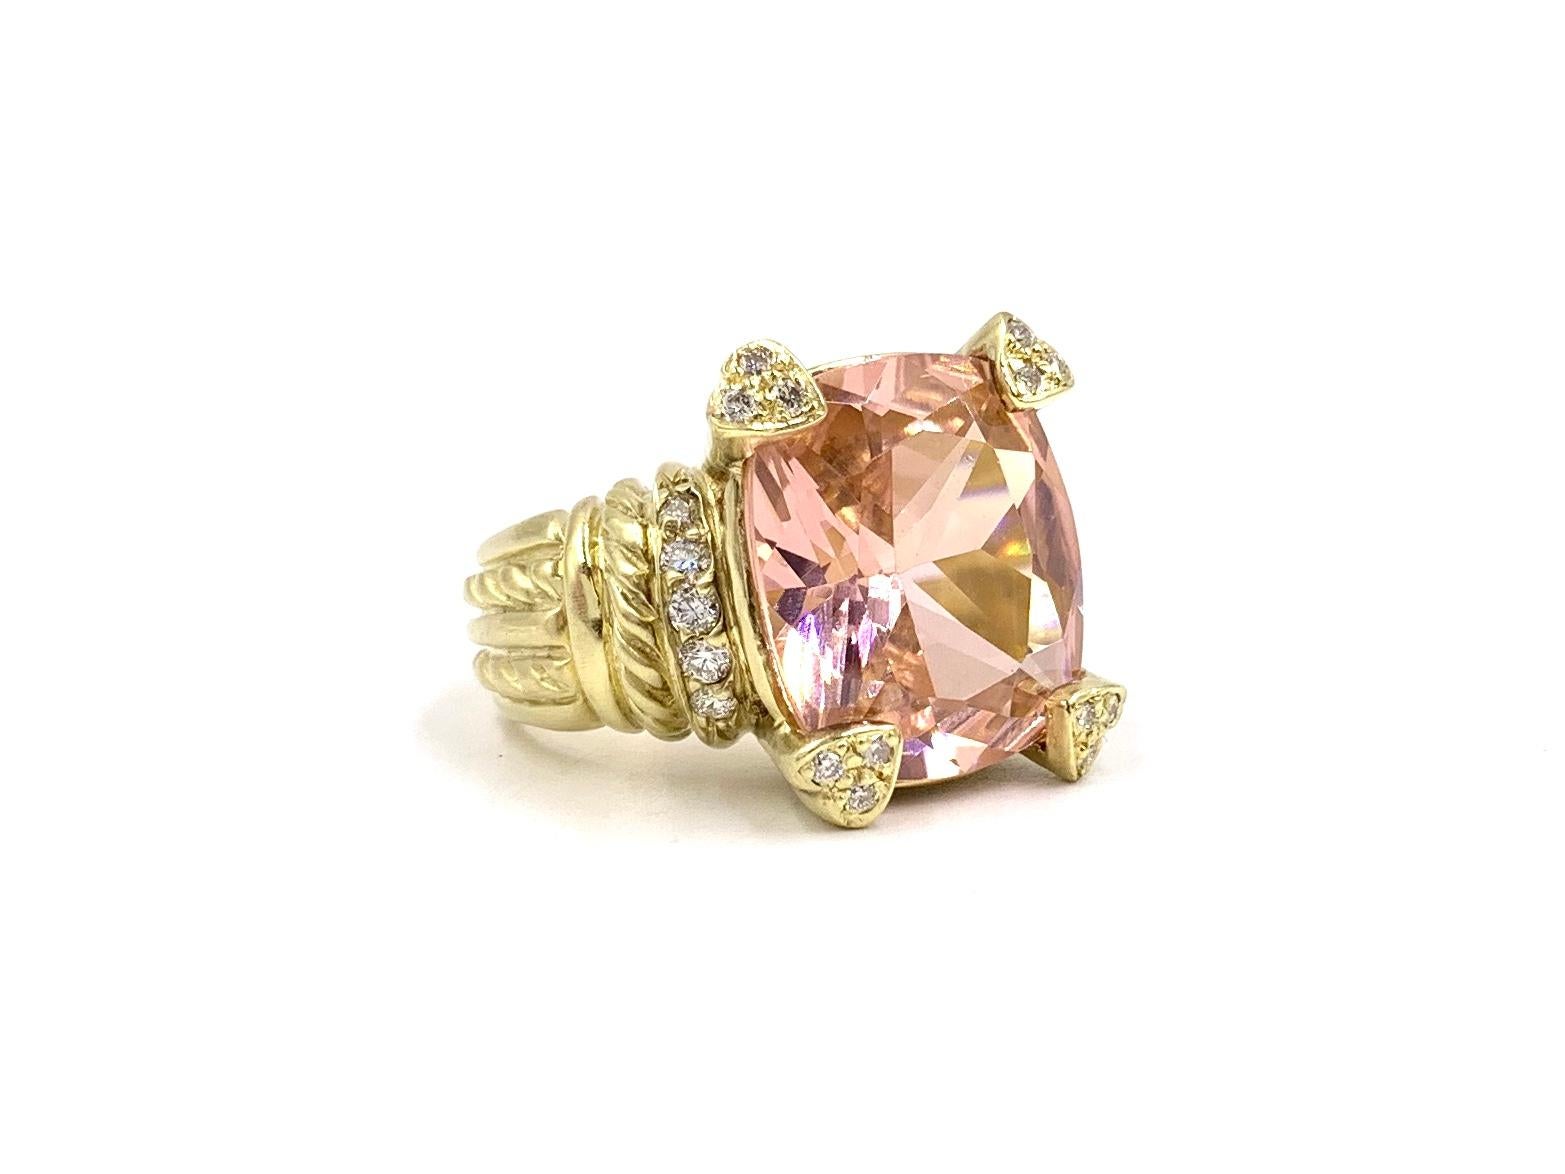 A solid and substantial 18 karat yellow gold cocktail ring by Judith Ripka featuring a large vibrant and lively cushion cut pink quartz with diamond encrusted heart shape prongs and ribbing. Diamond total weight is .30 carats at approximately F-G